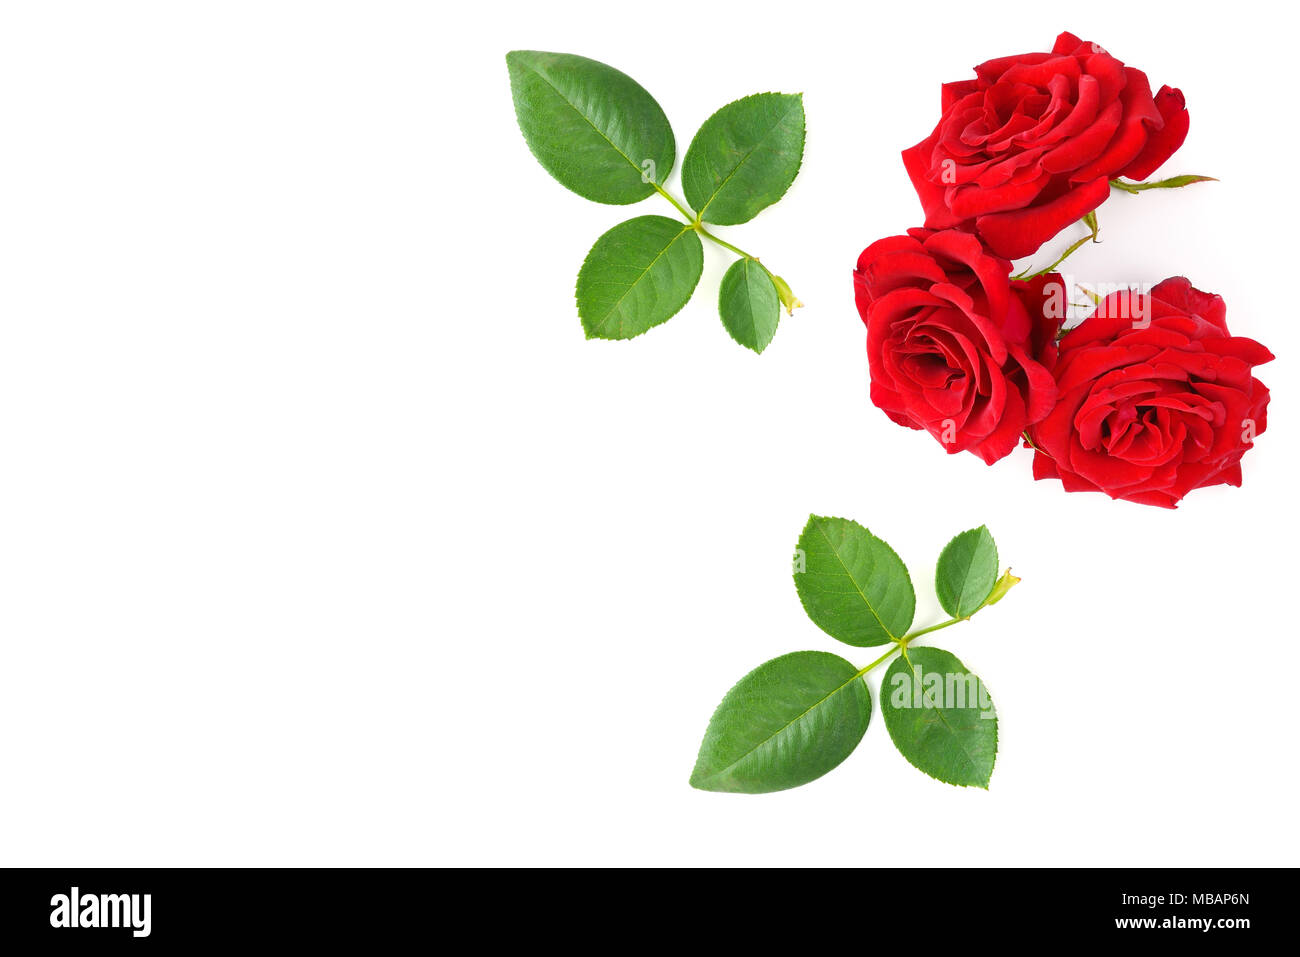 Red roses with green leaves isolated on white background. Top view. Free space for text. Stock Photo